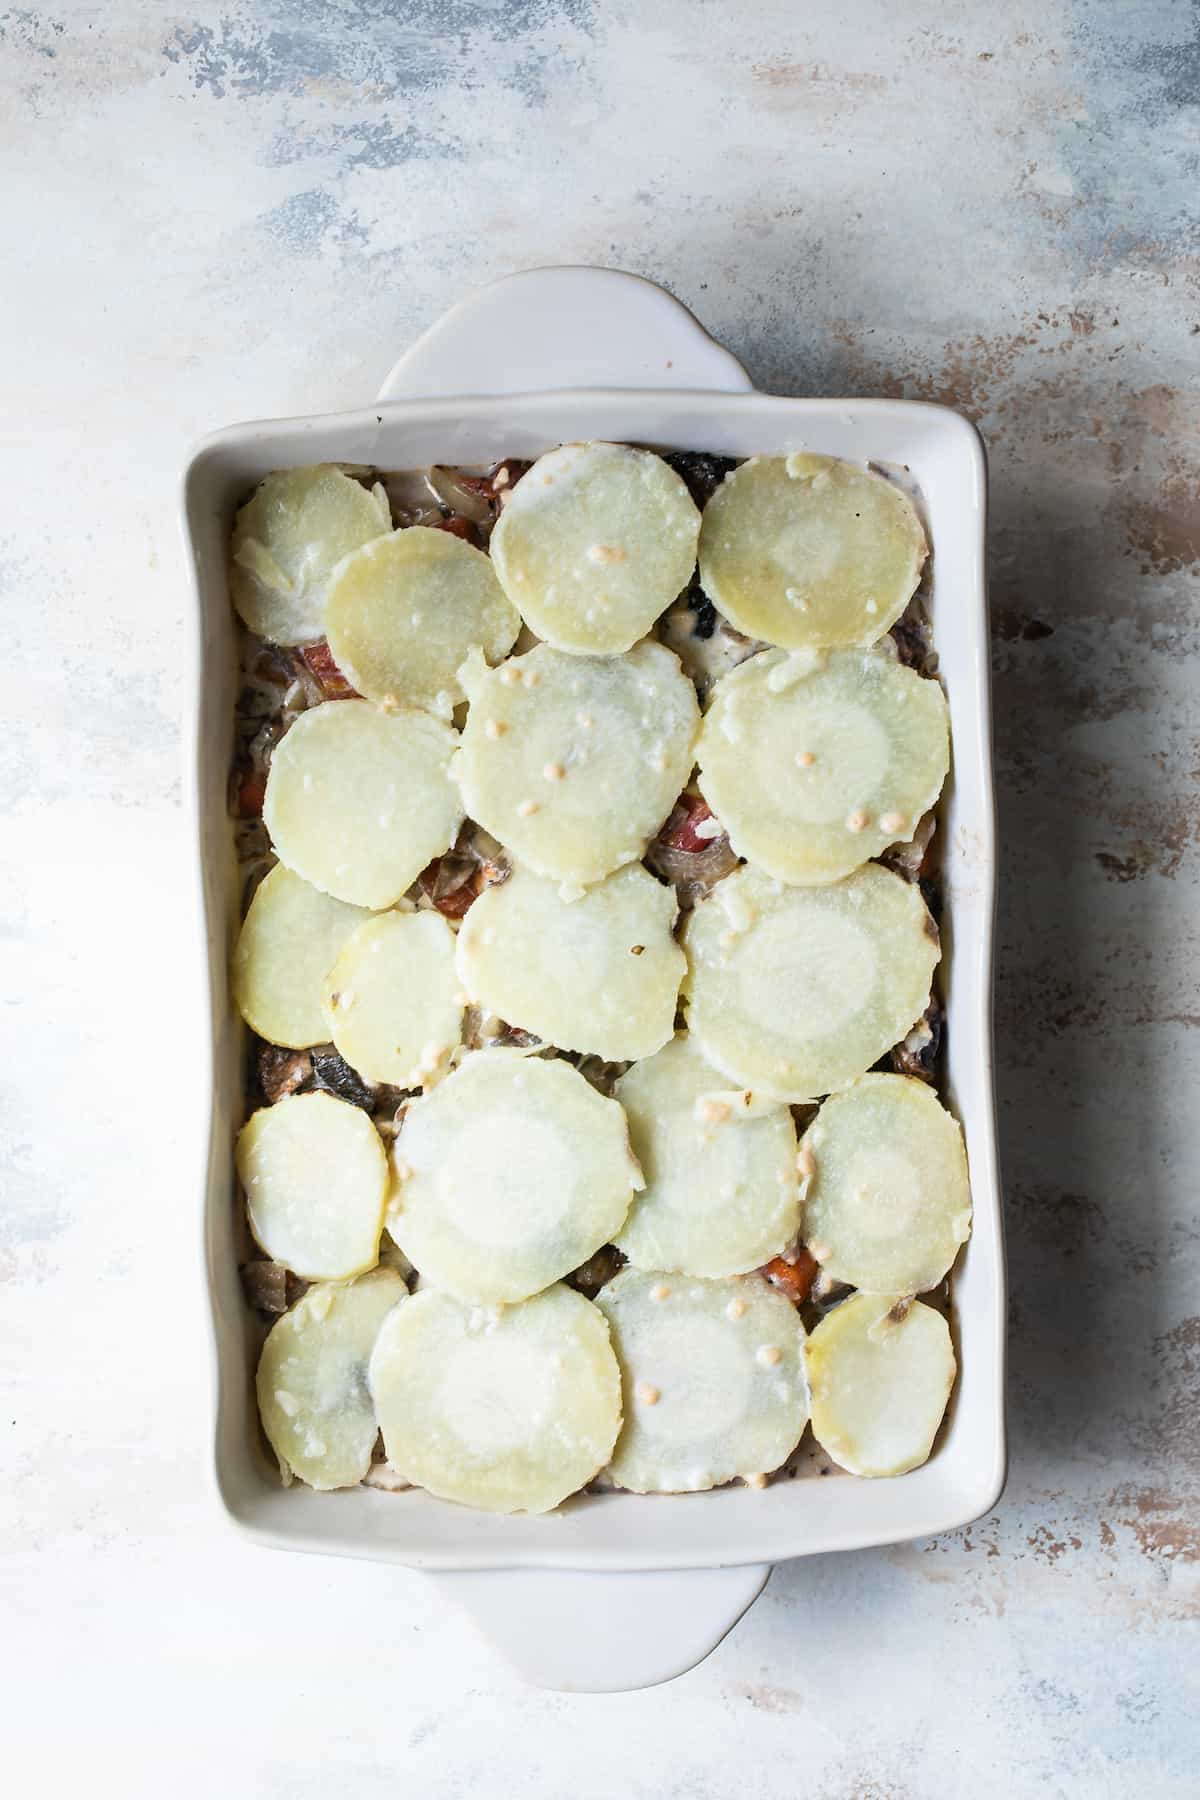 A Layered Pan of Unbaked Moussaka with Potato Slices on Top